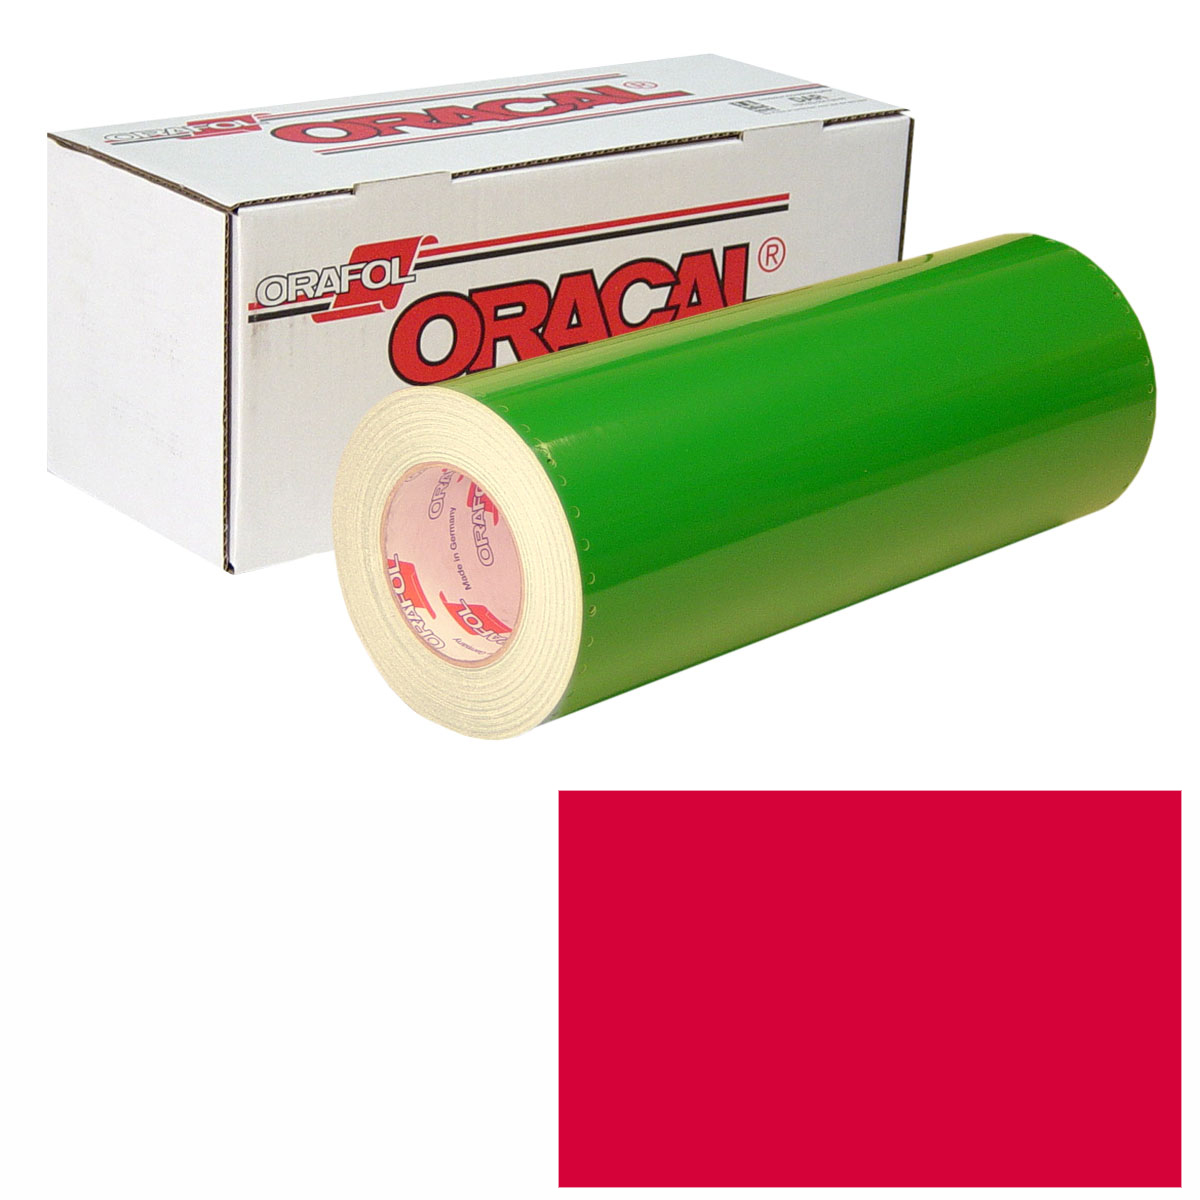 ORACAL 651 30in X 10yd 032 Light Red